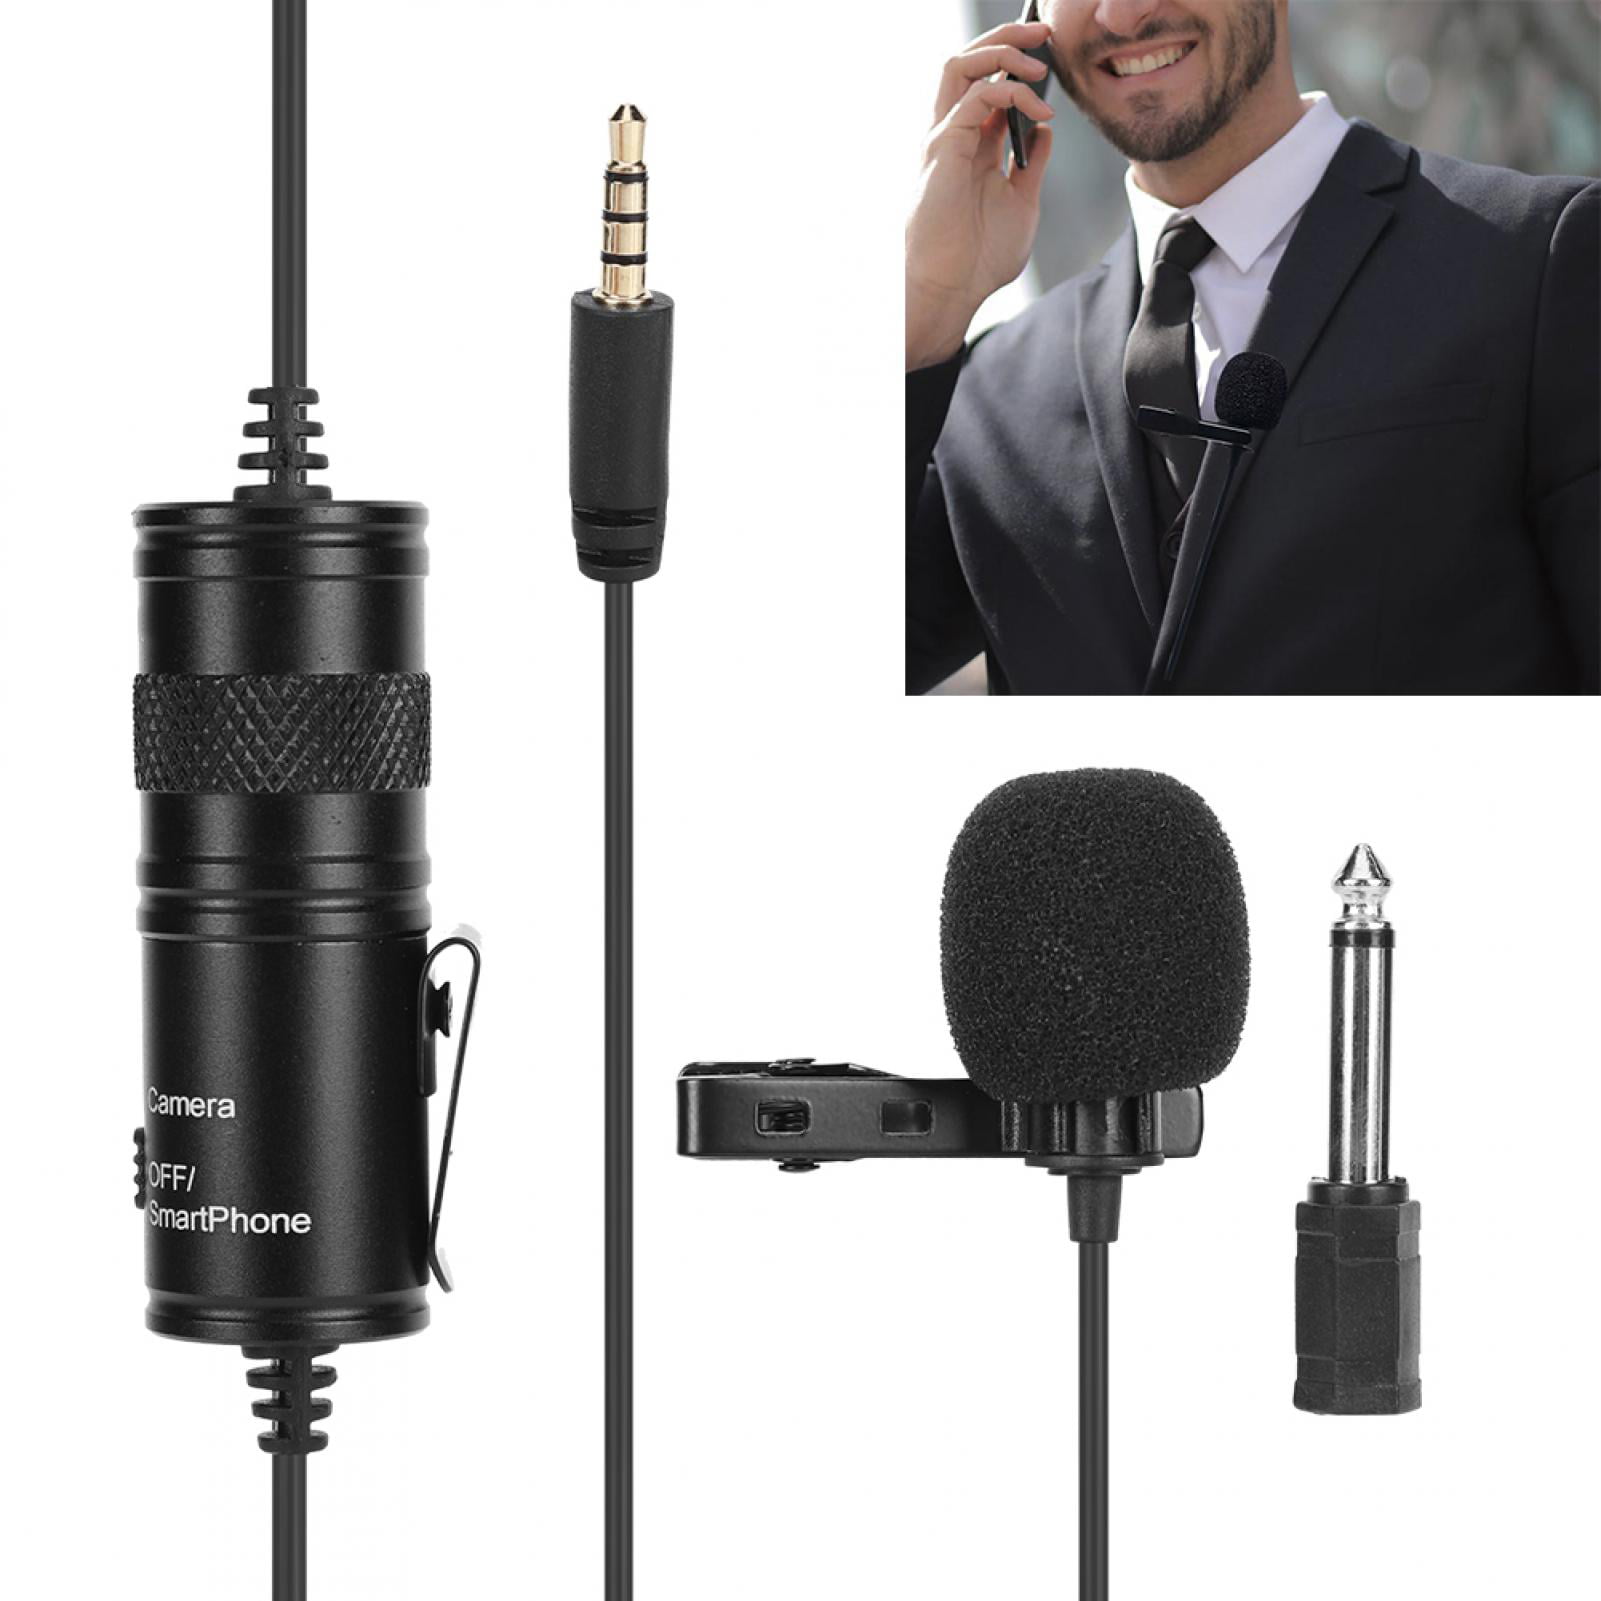 Computers Super Cardioid Interview Microphone Aluminum Alloy Voice Recorders for Phone Camera Small Voice Recording Microphone 